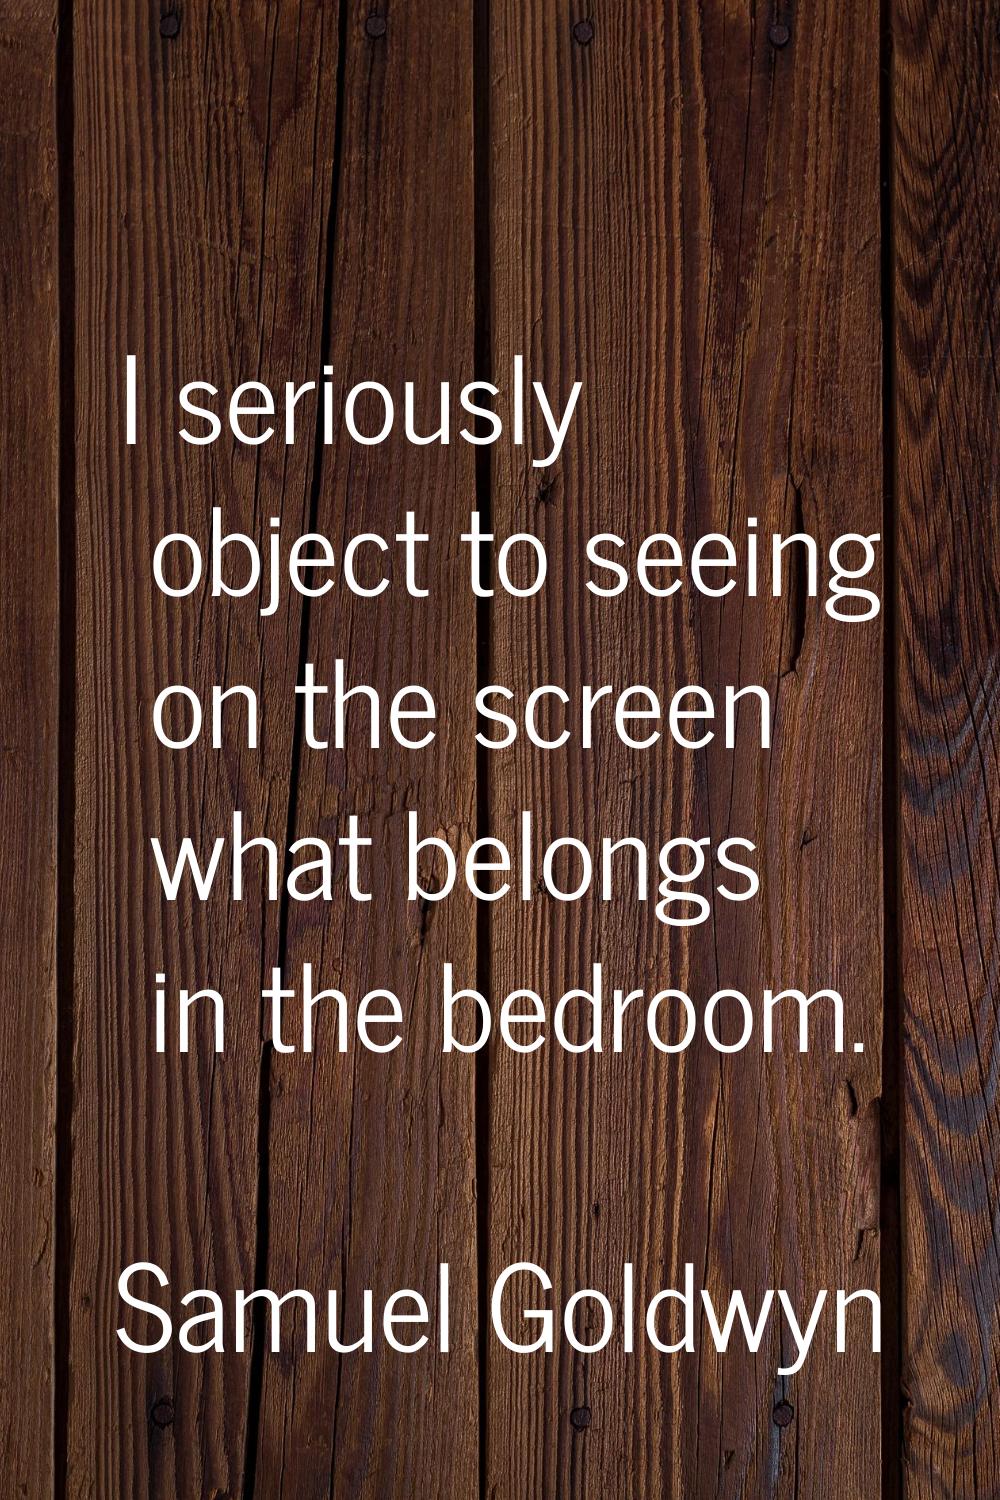 I seriously object to seeing on the screen what belongs in the bedroom.